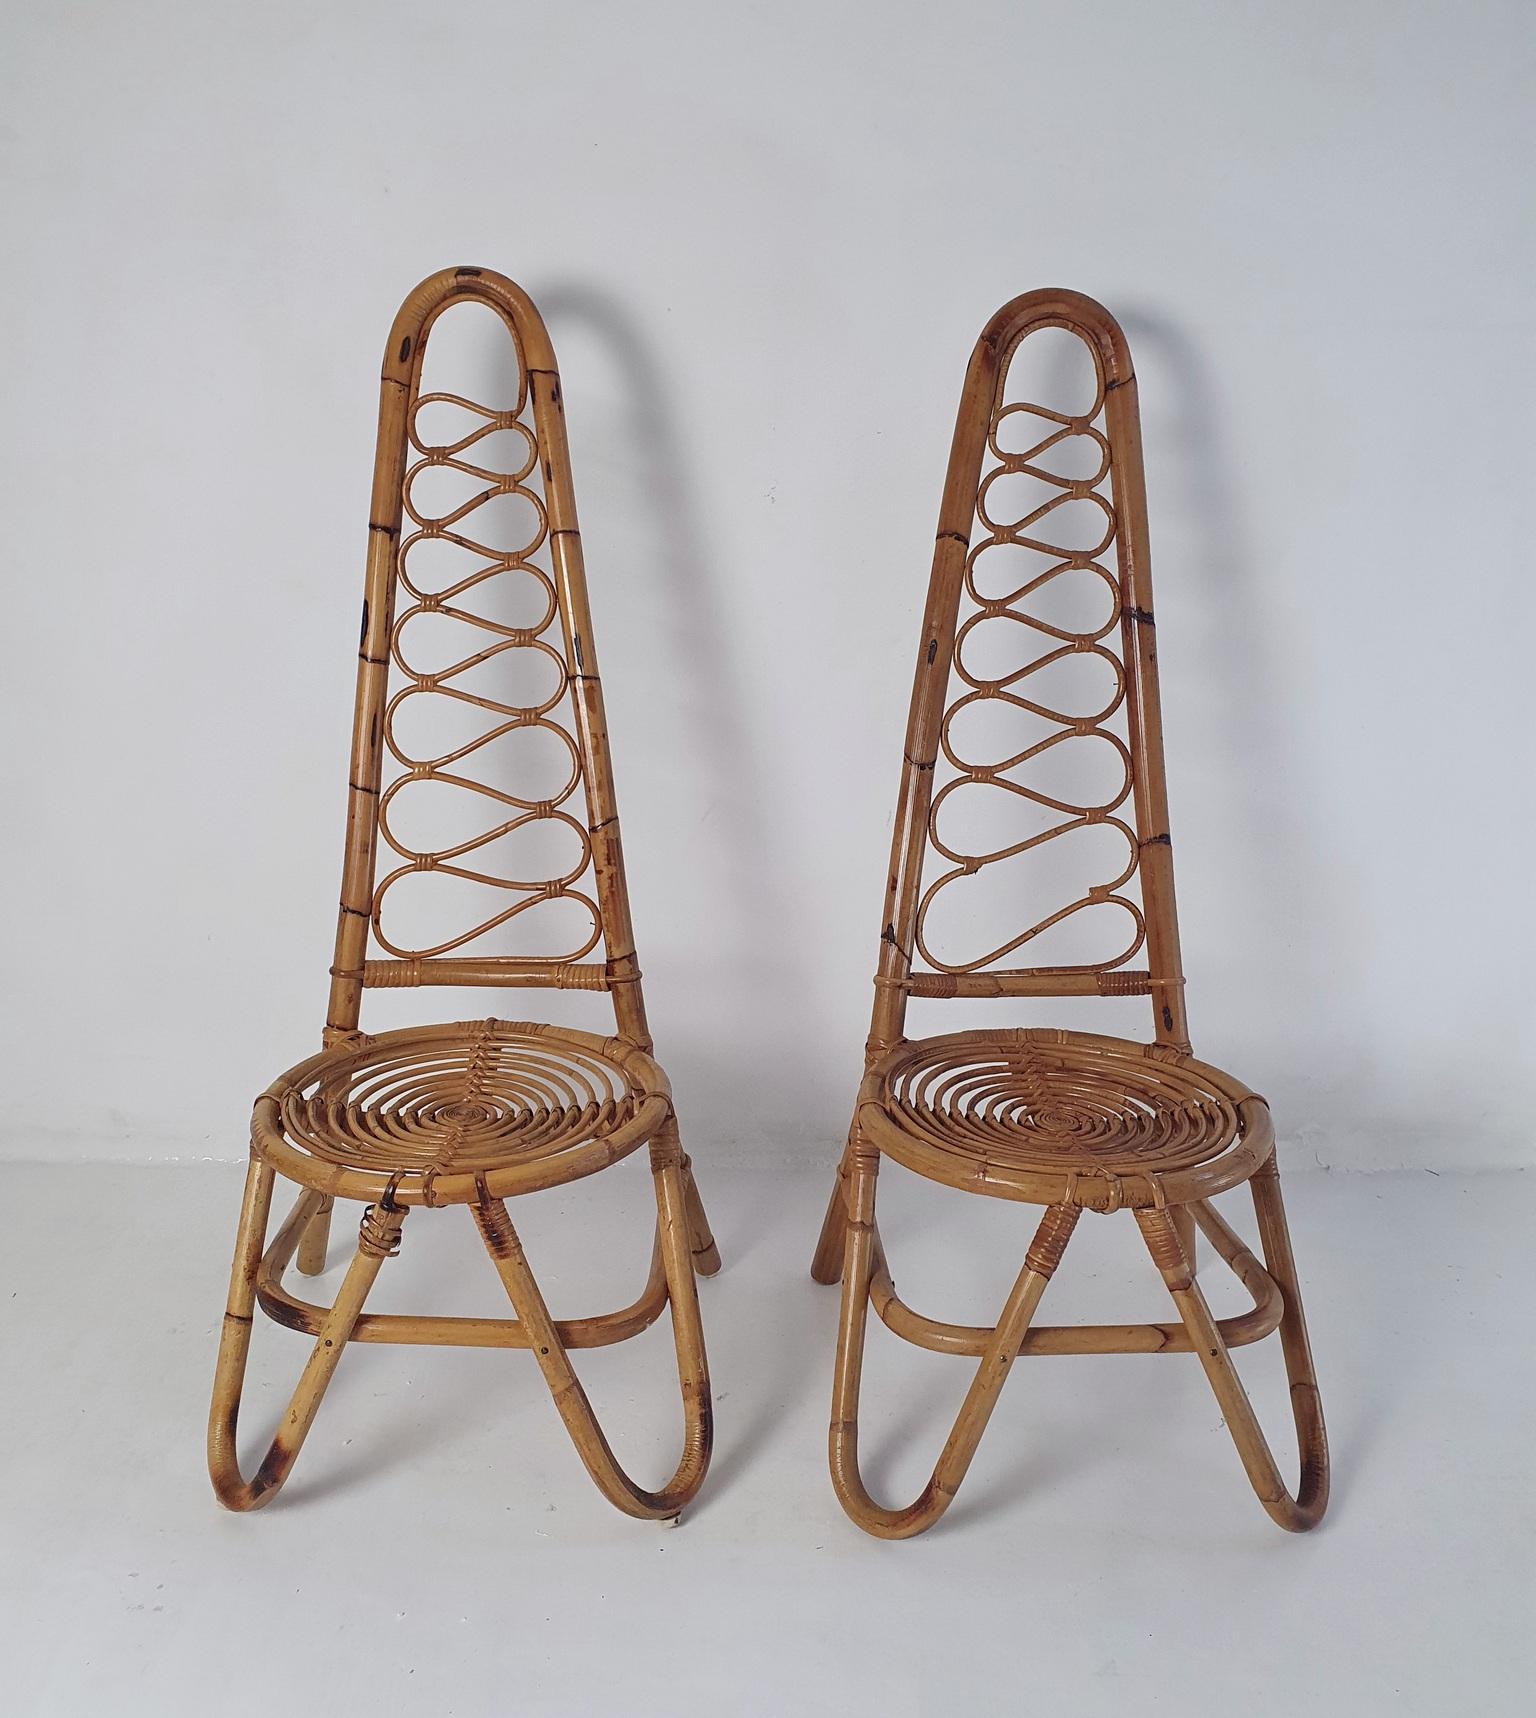 Midcentury pair of highbacked chairs in bamboo and rattan in the manner of manufacturer Bonacina from the 1950's. The diameter of the seat is 40 centimeters and the seat height is 35 centimeters. Would look nice matched with a small cushion as well.